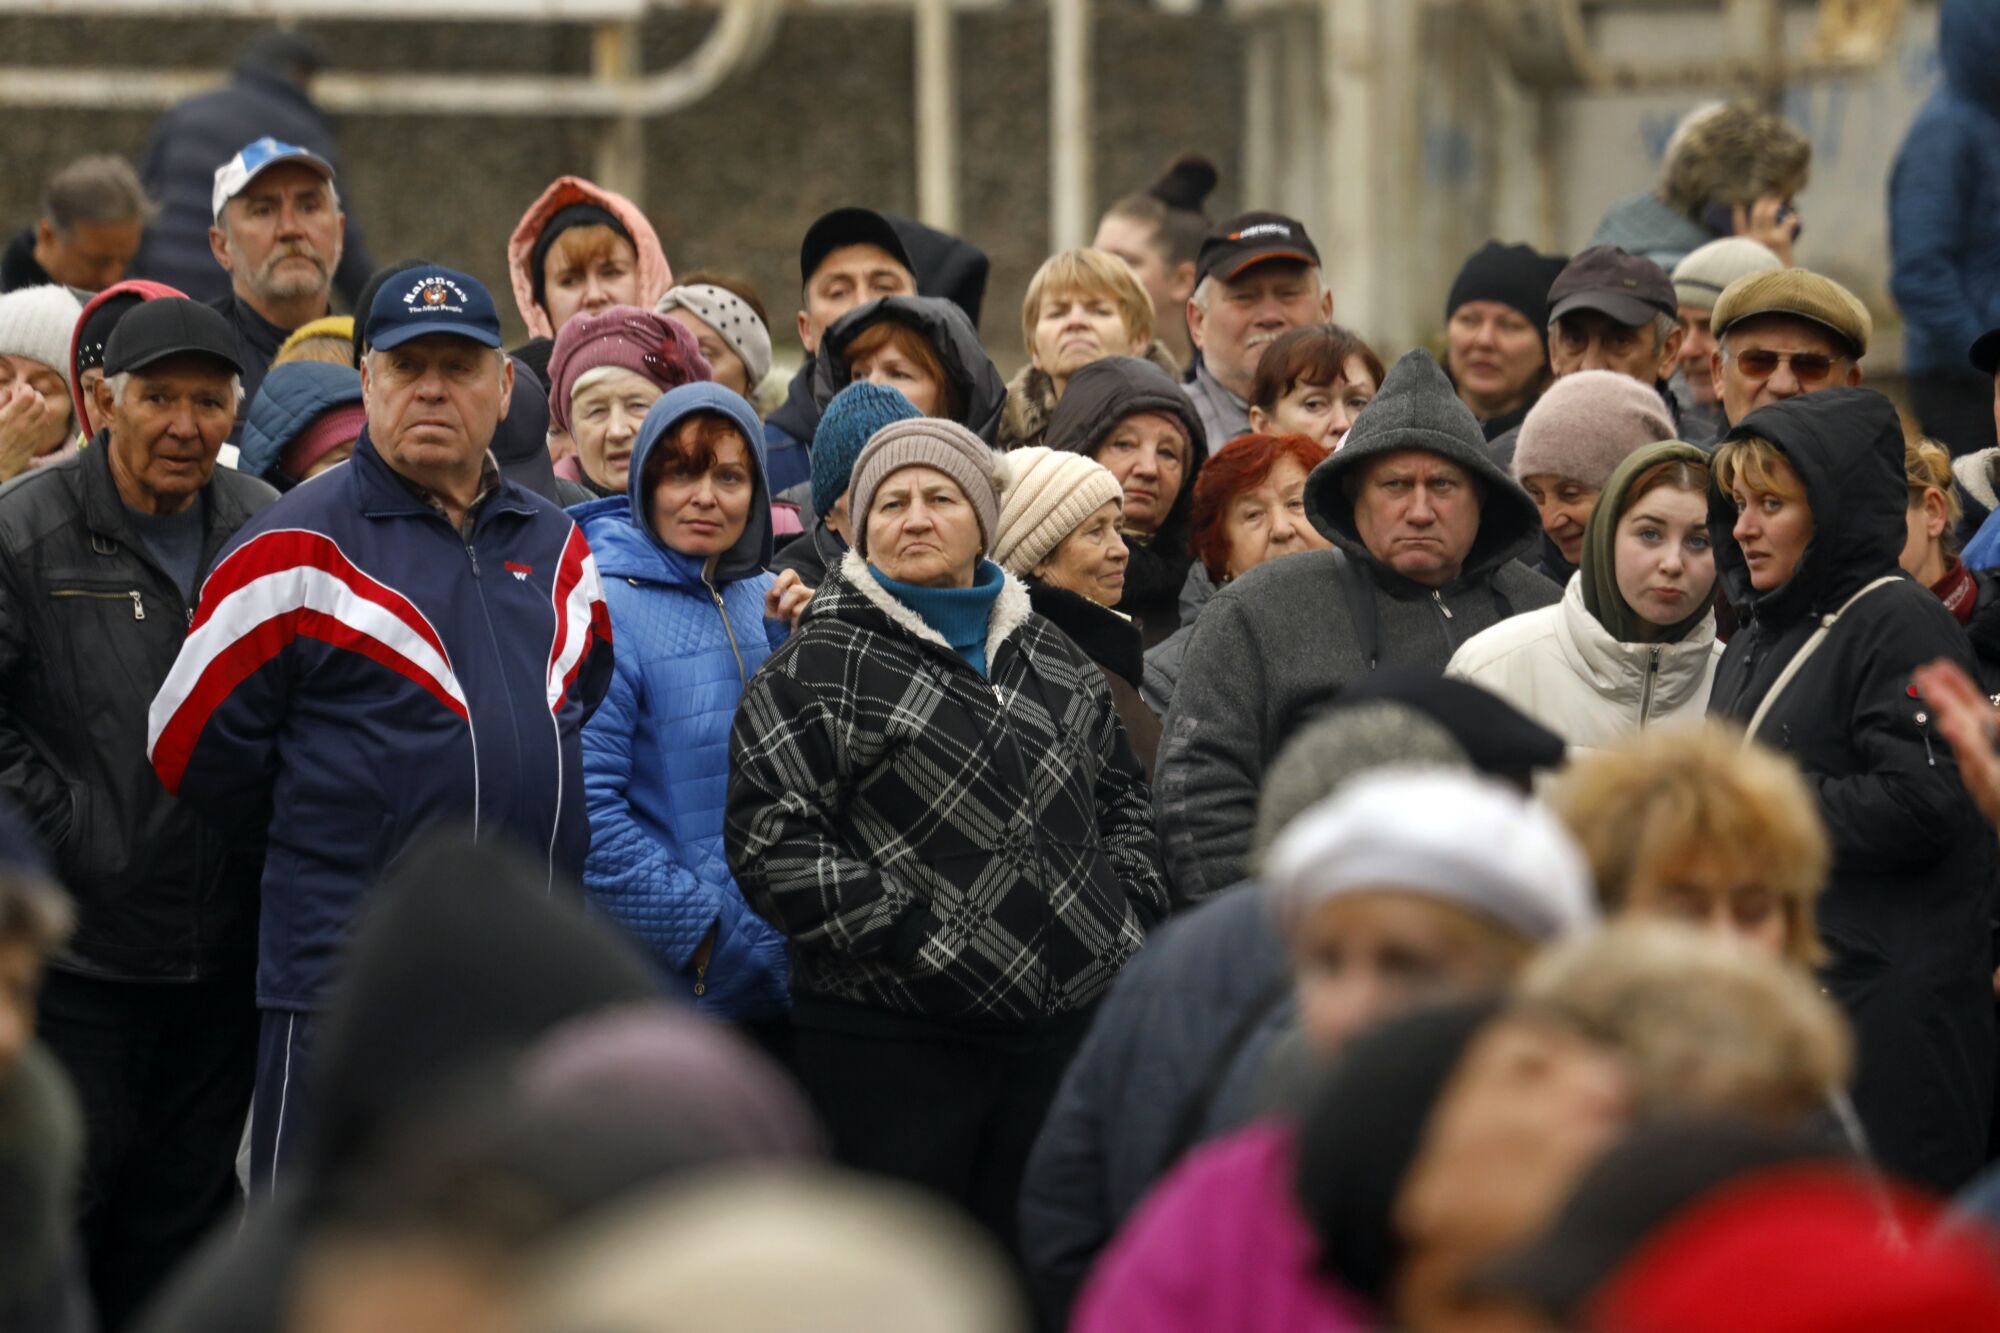 A crowd of people standing together, dressed in warm clothing, many wearing hooded jackets 